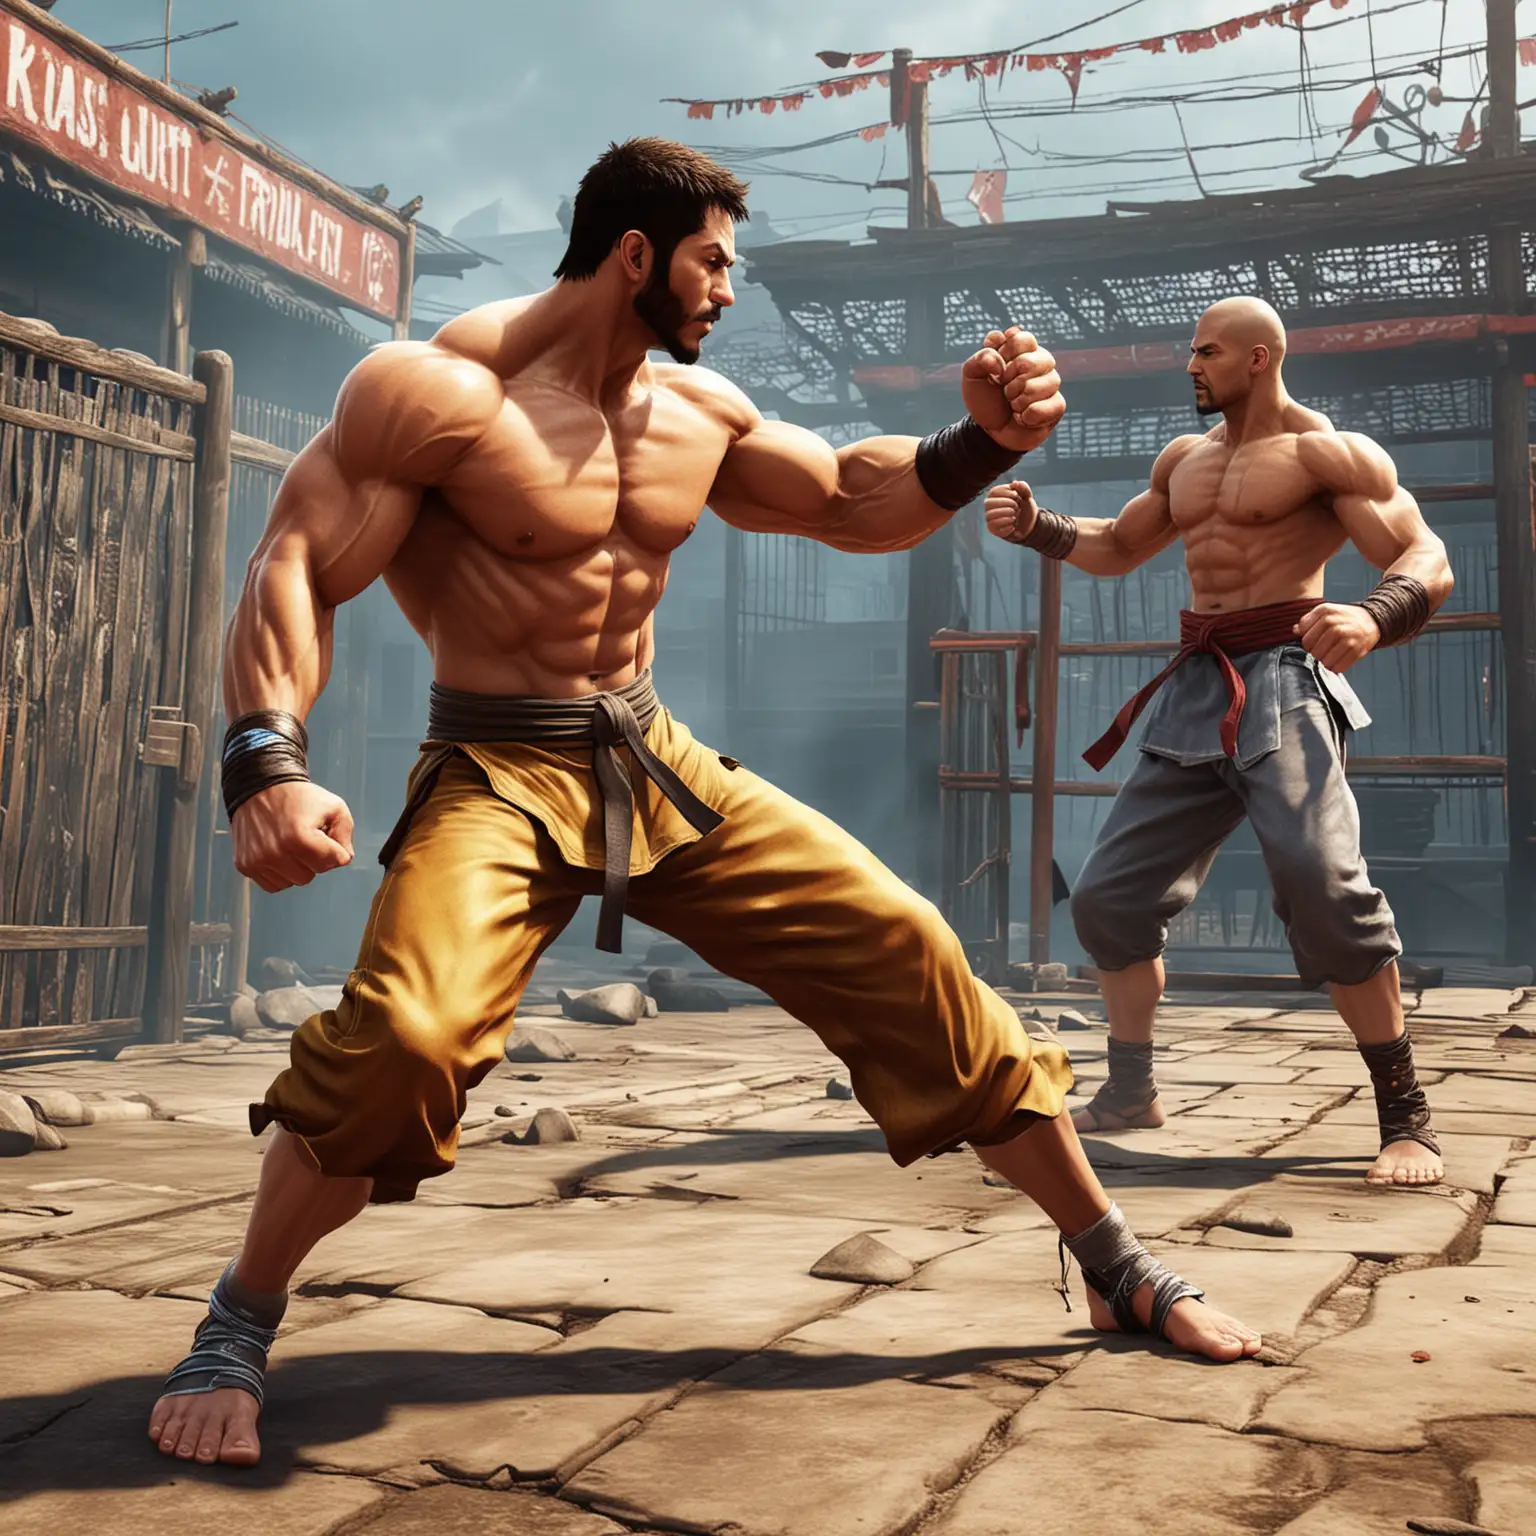  it’s time to prepare yourself for the unbeatable offline fighting game. Are you ready to learn action-packed fusion of fighting games, karate fight, kung fu battle, cage wrestling, Get ready to be a fantastic karate fighter of gym fight wali new game and win all games, showing temple in background, fighting between 2 bodybuilder karate kung fu